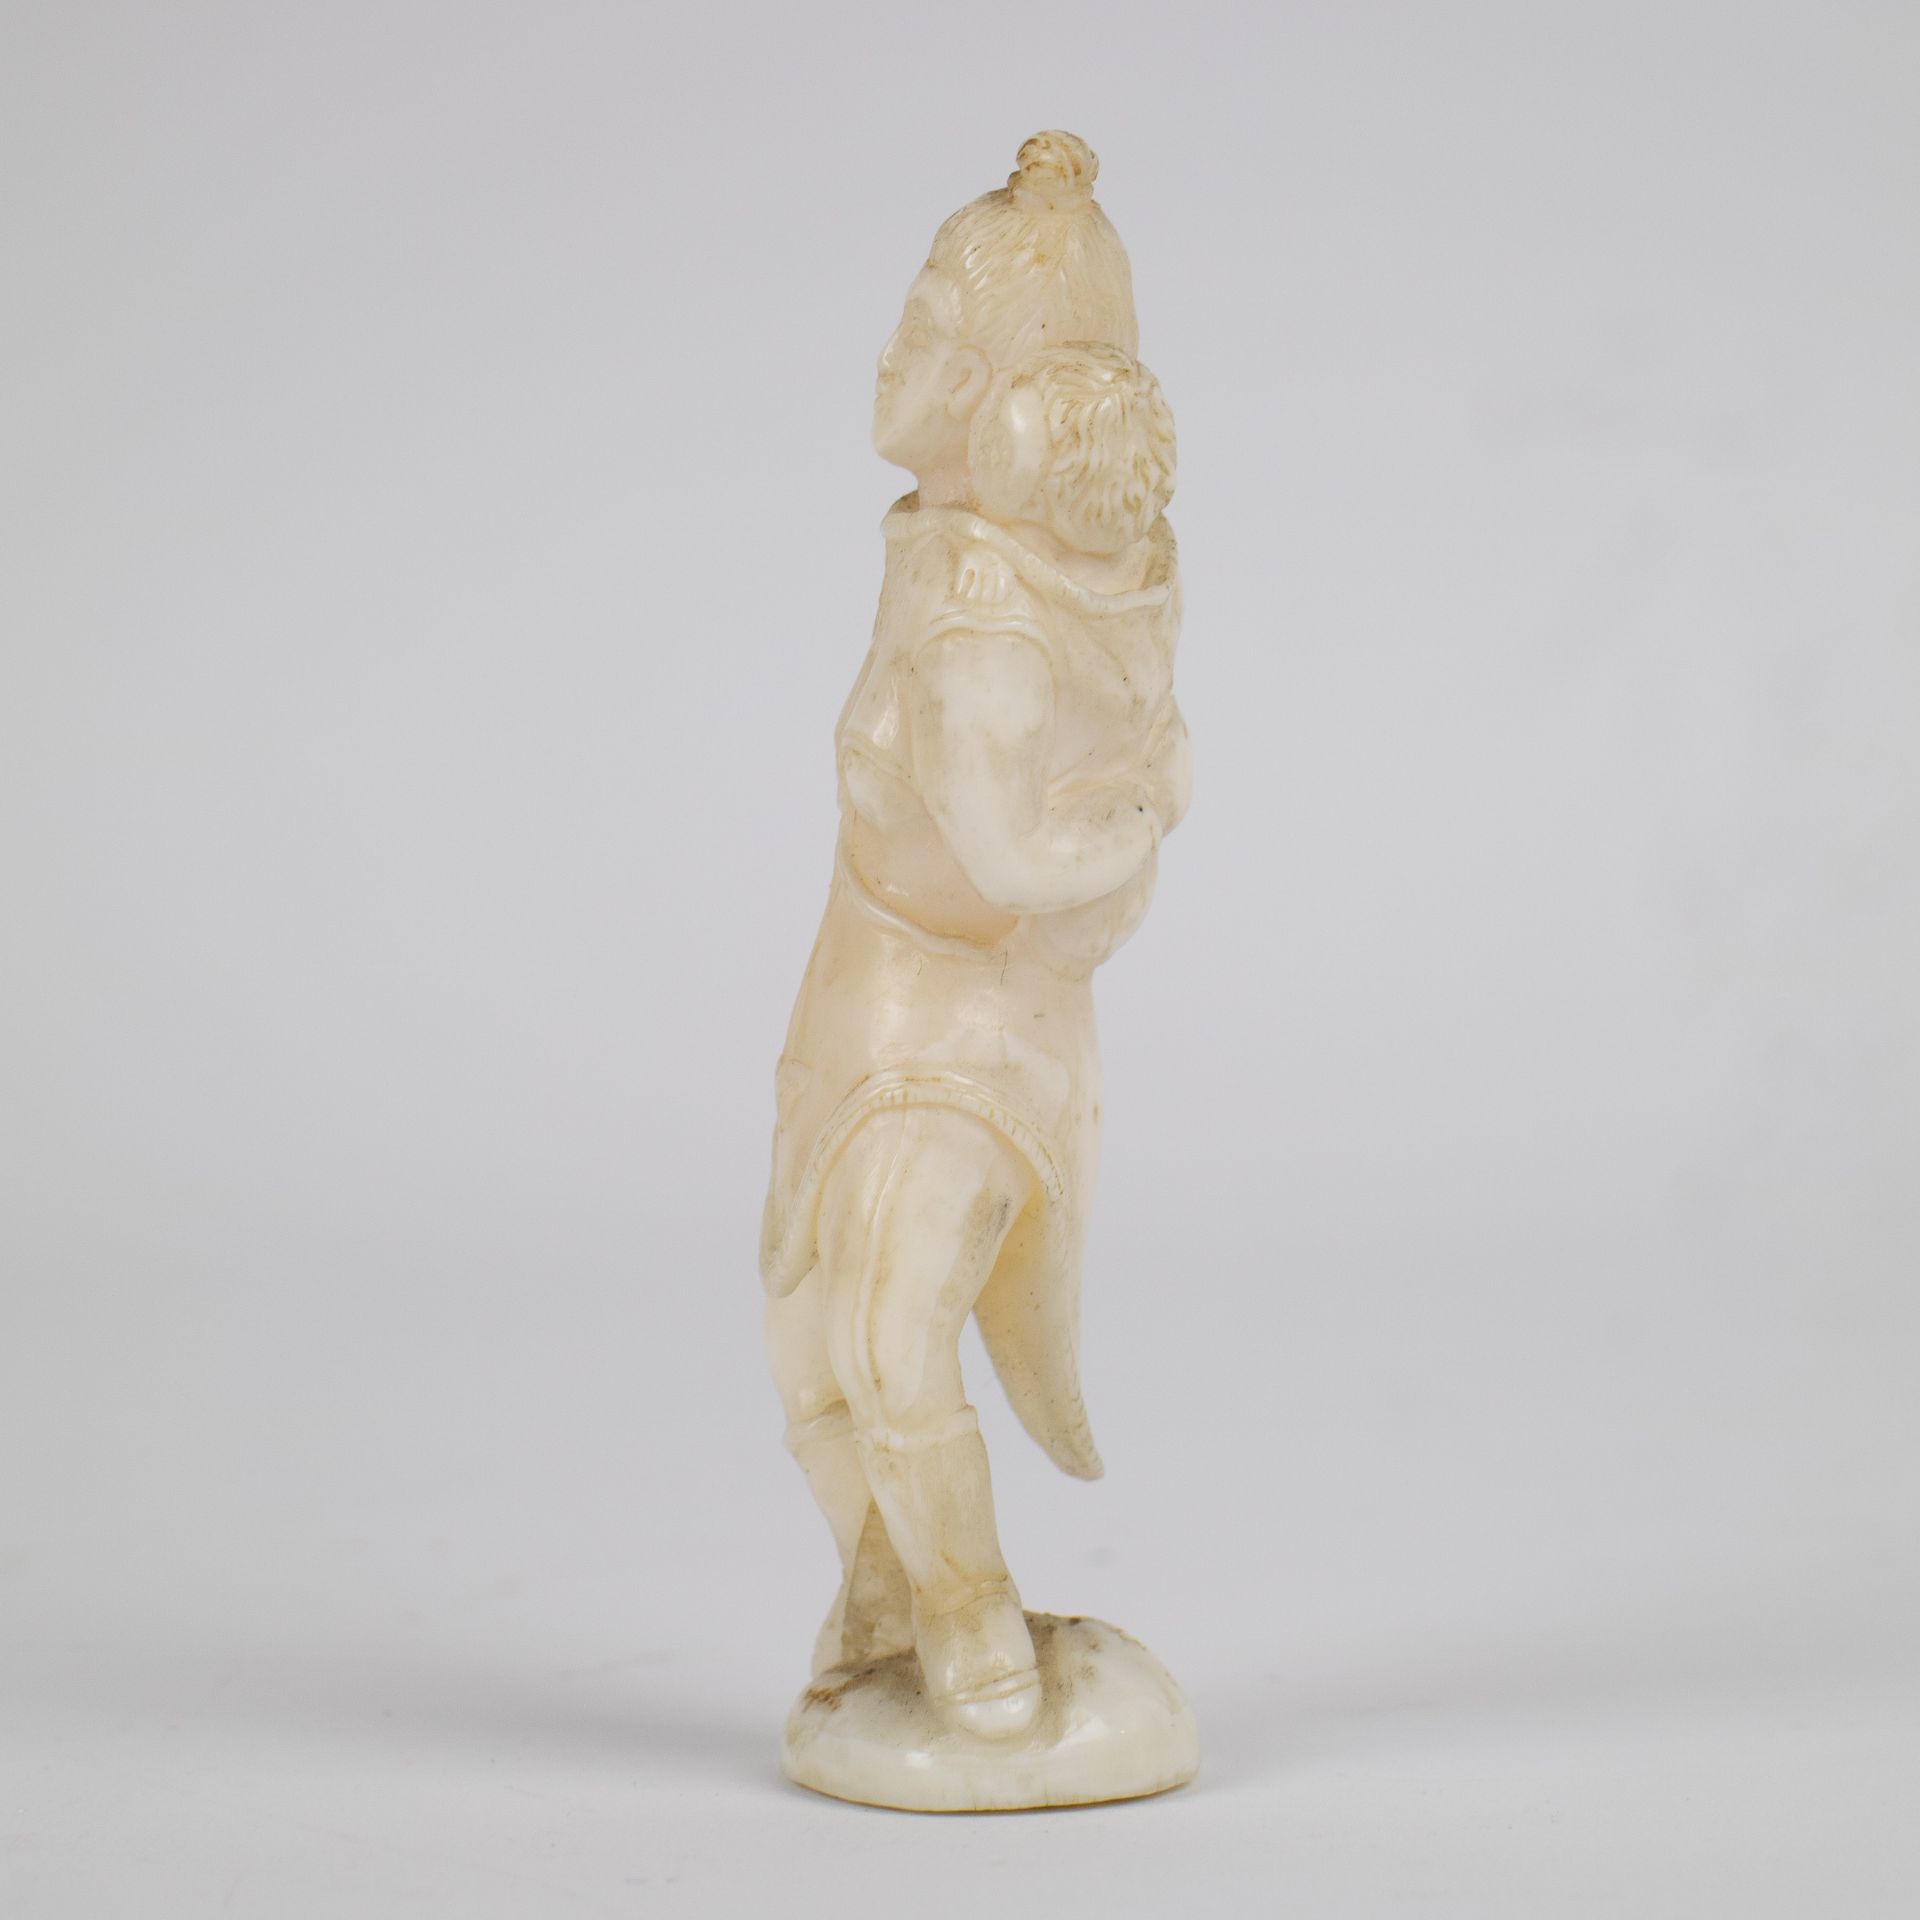 Marine ivory sculpture of a woman carrying a child on her back, Greenland, early 20th century. - Image 2 of 4